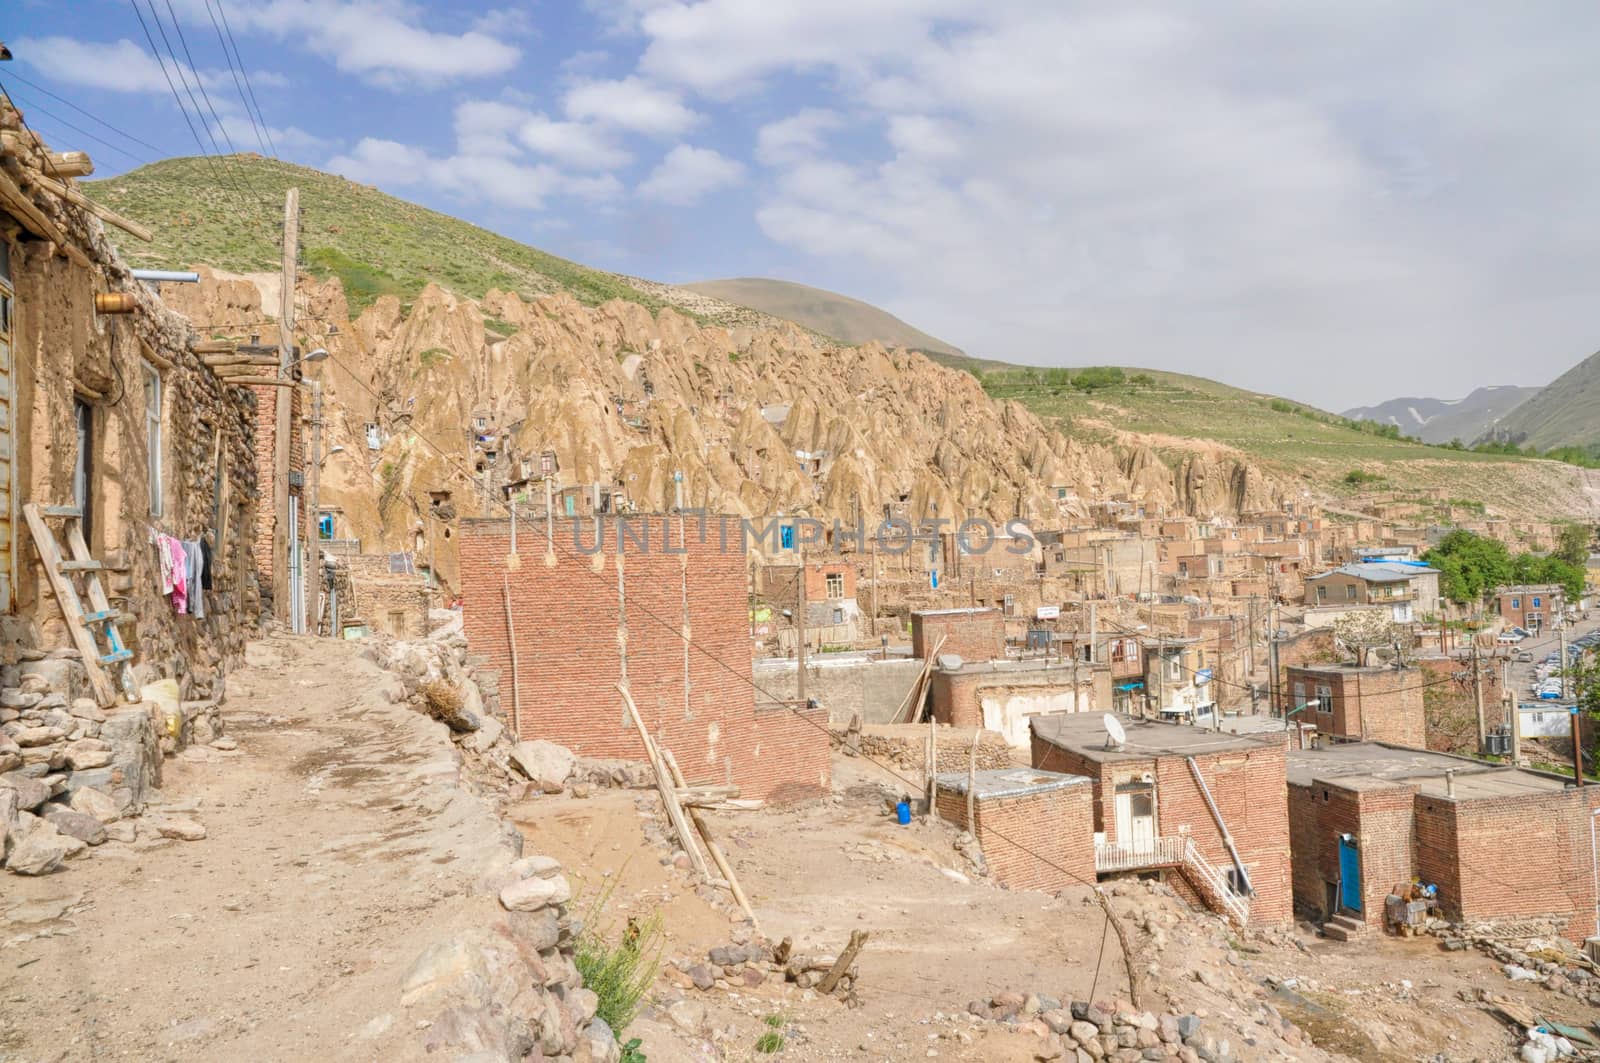 Scenic view of unusual cone shaped dwellings in Kandovan village in Iran